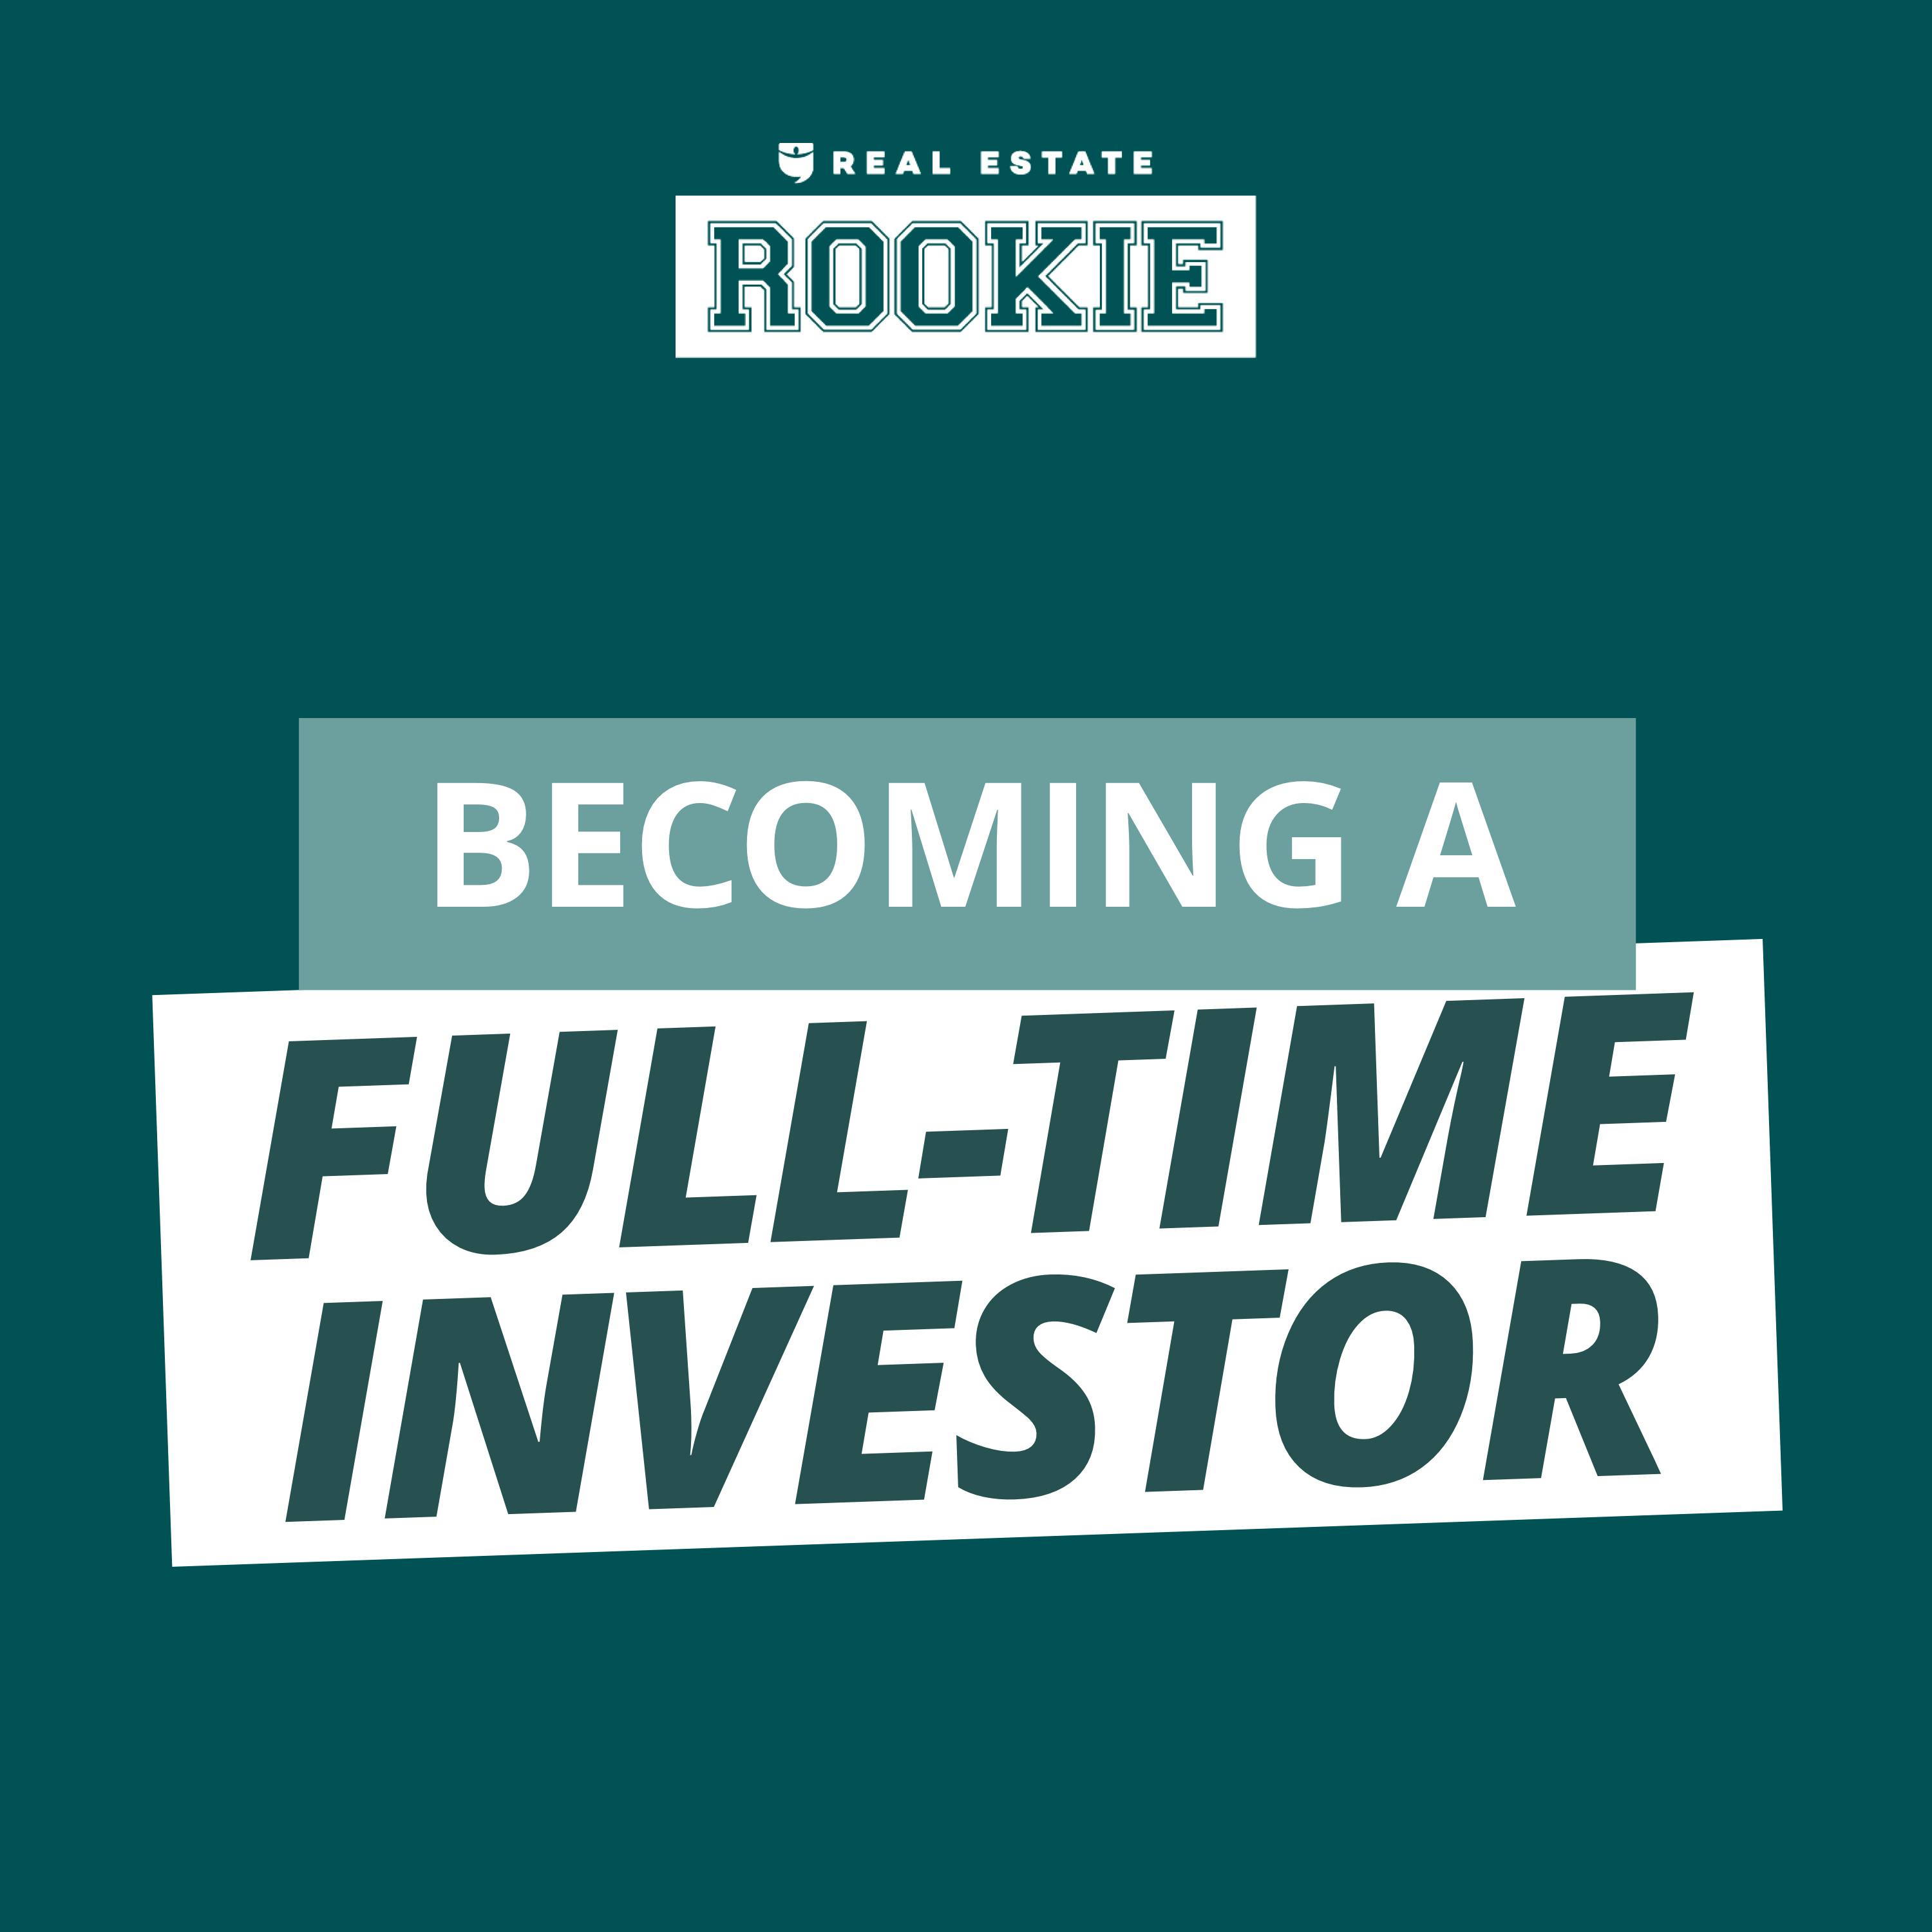 126: Rookie Reply: Want to Be a Full-Time Investor? Learn These Skills!